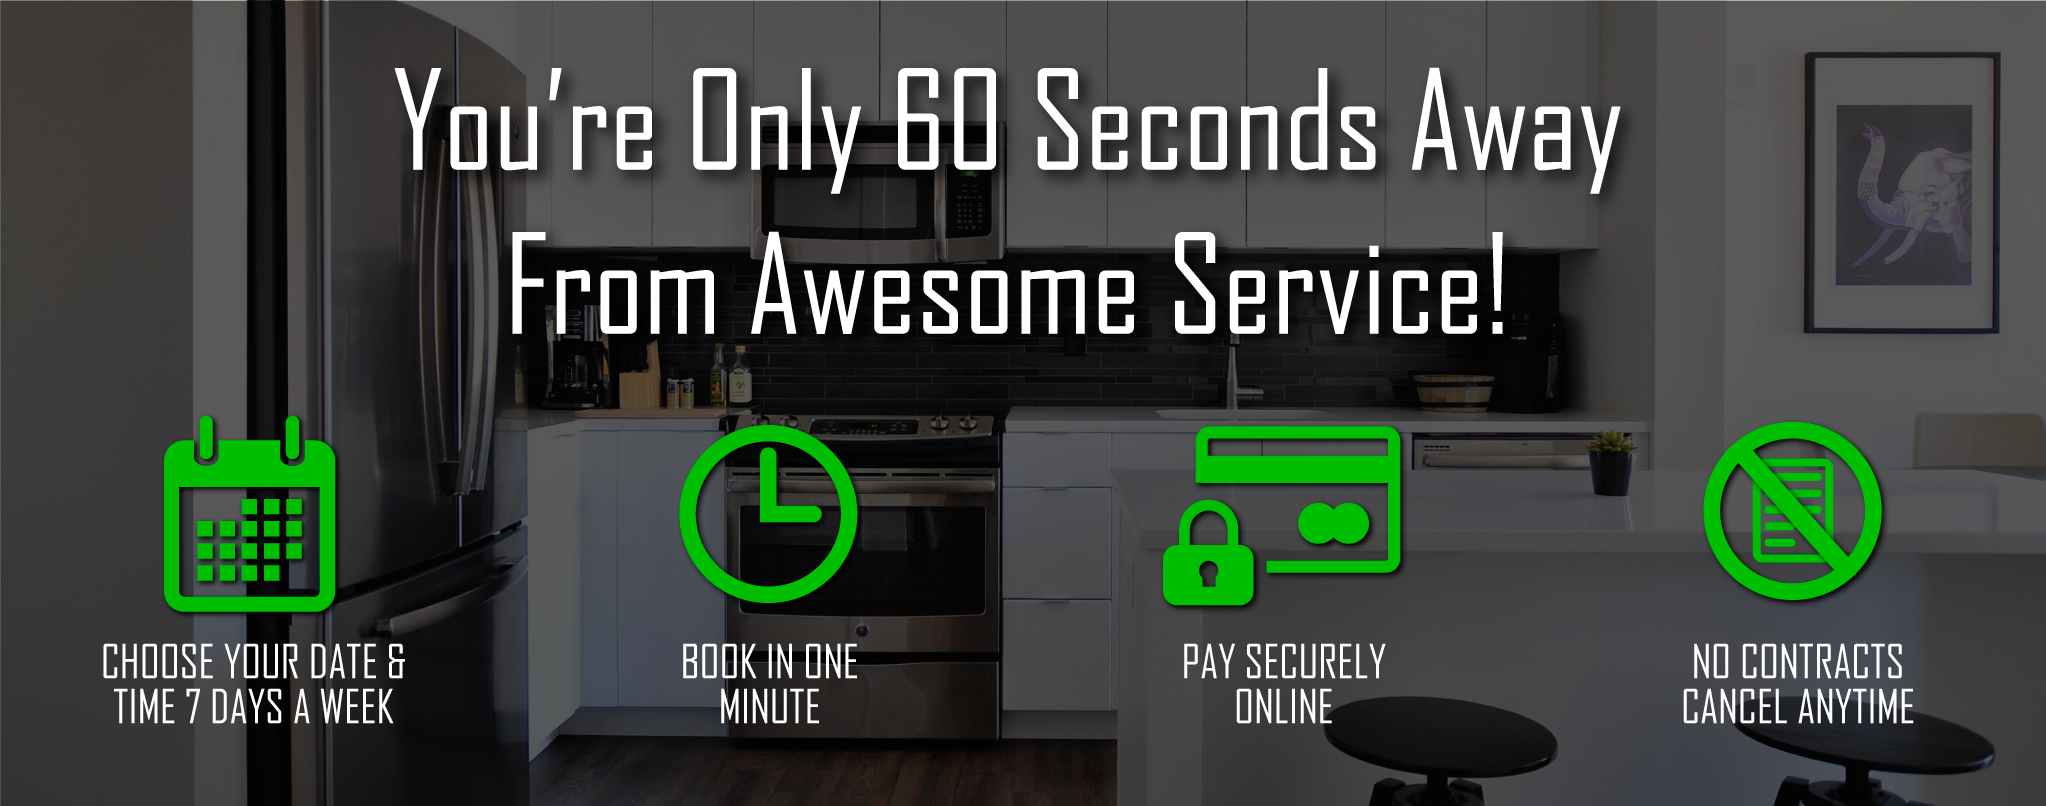 60 Second Booking Cleaning Service